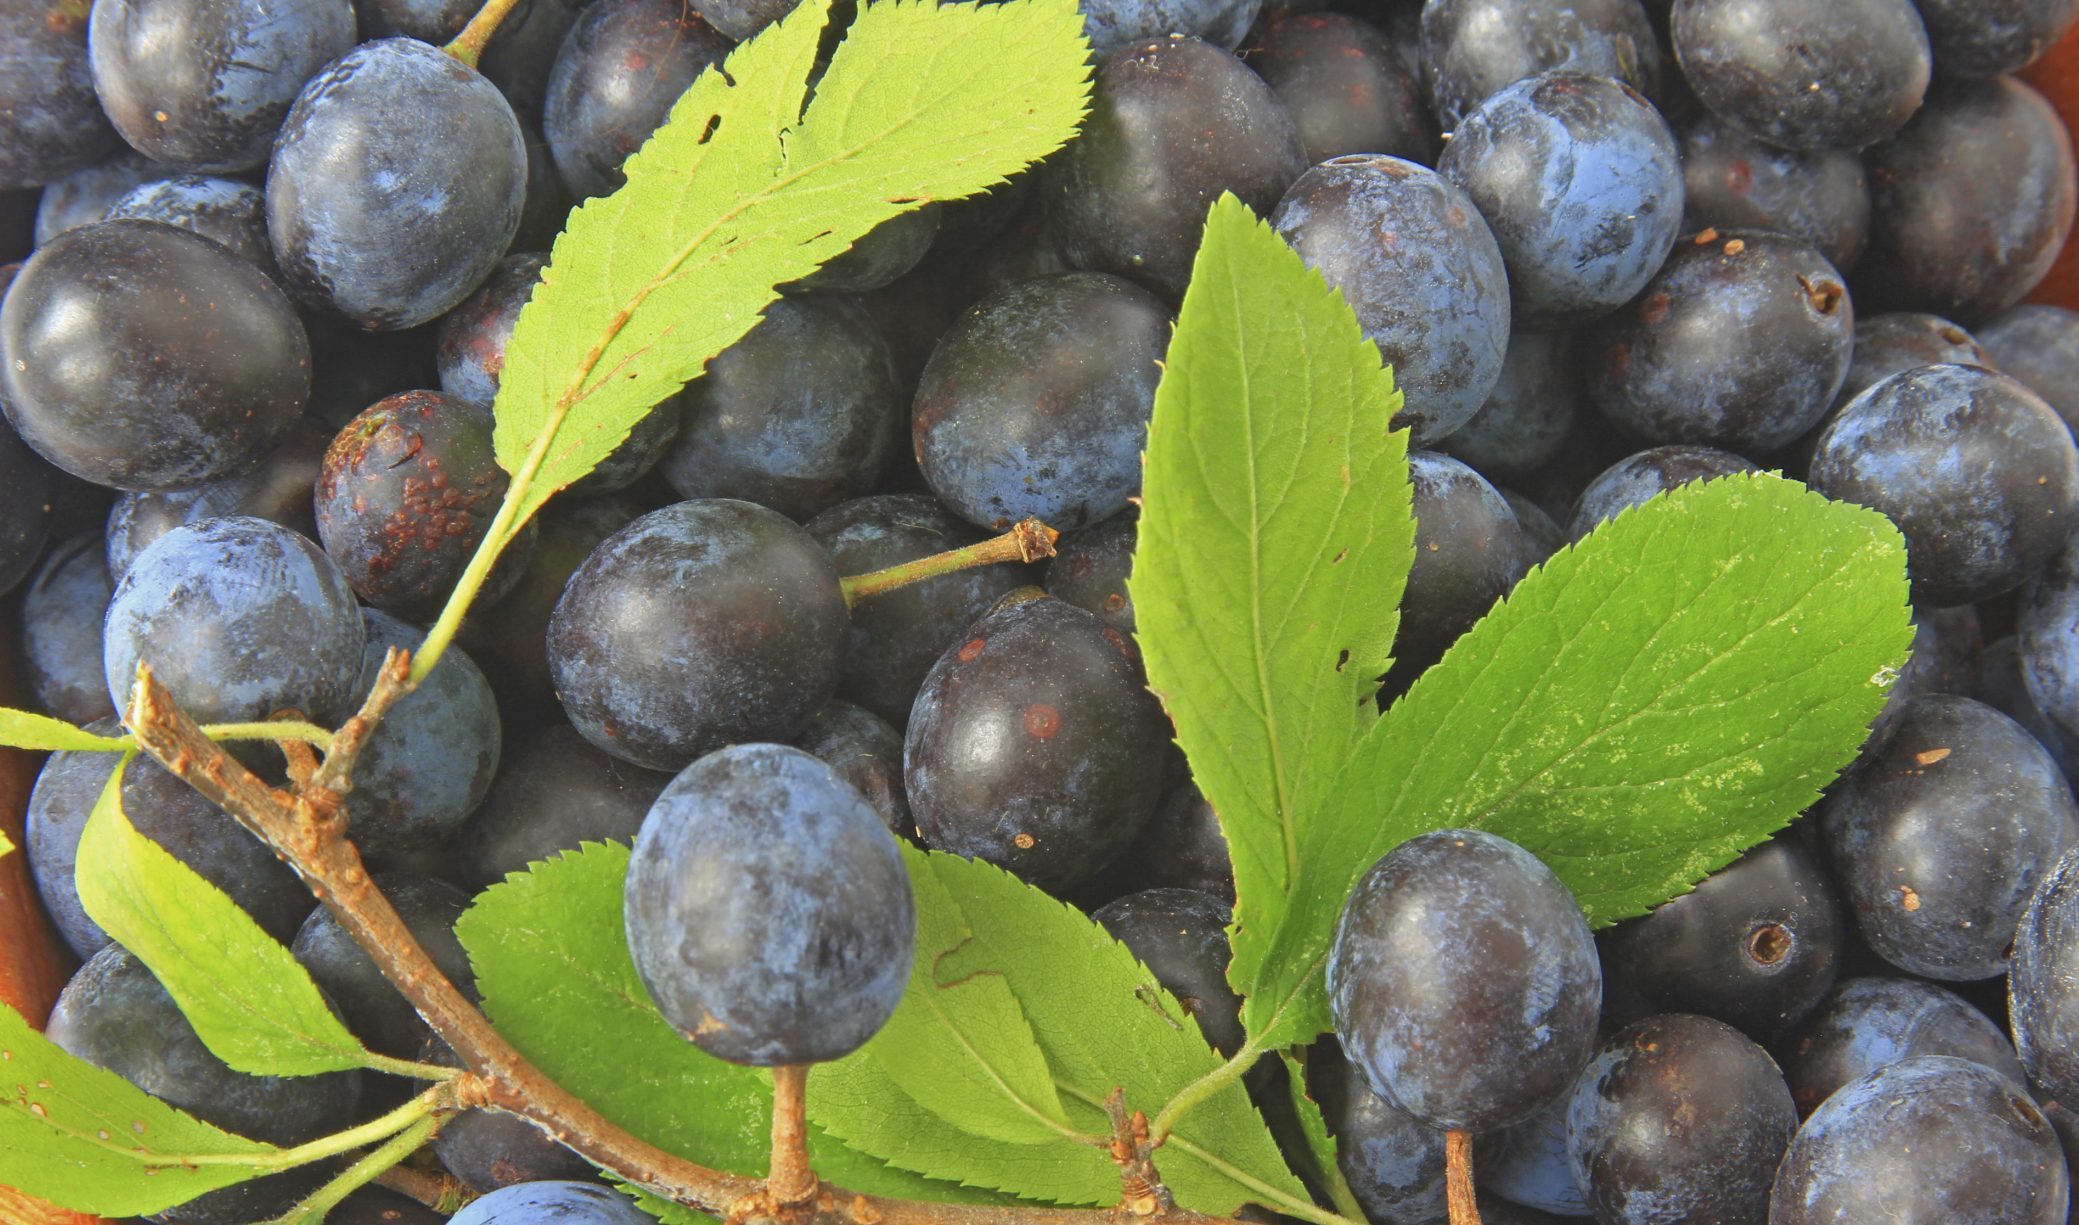 Sloes like these are vital for sloe gin production